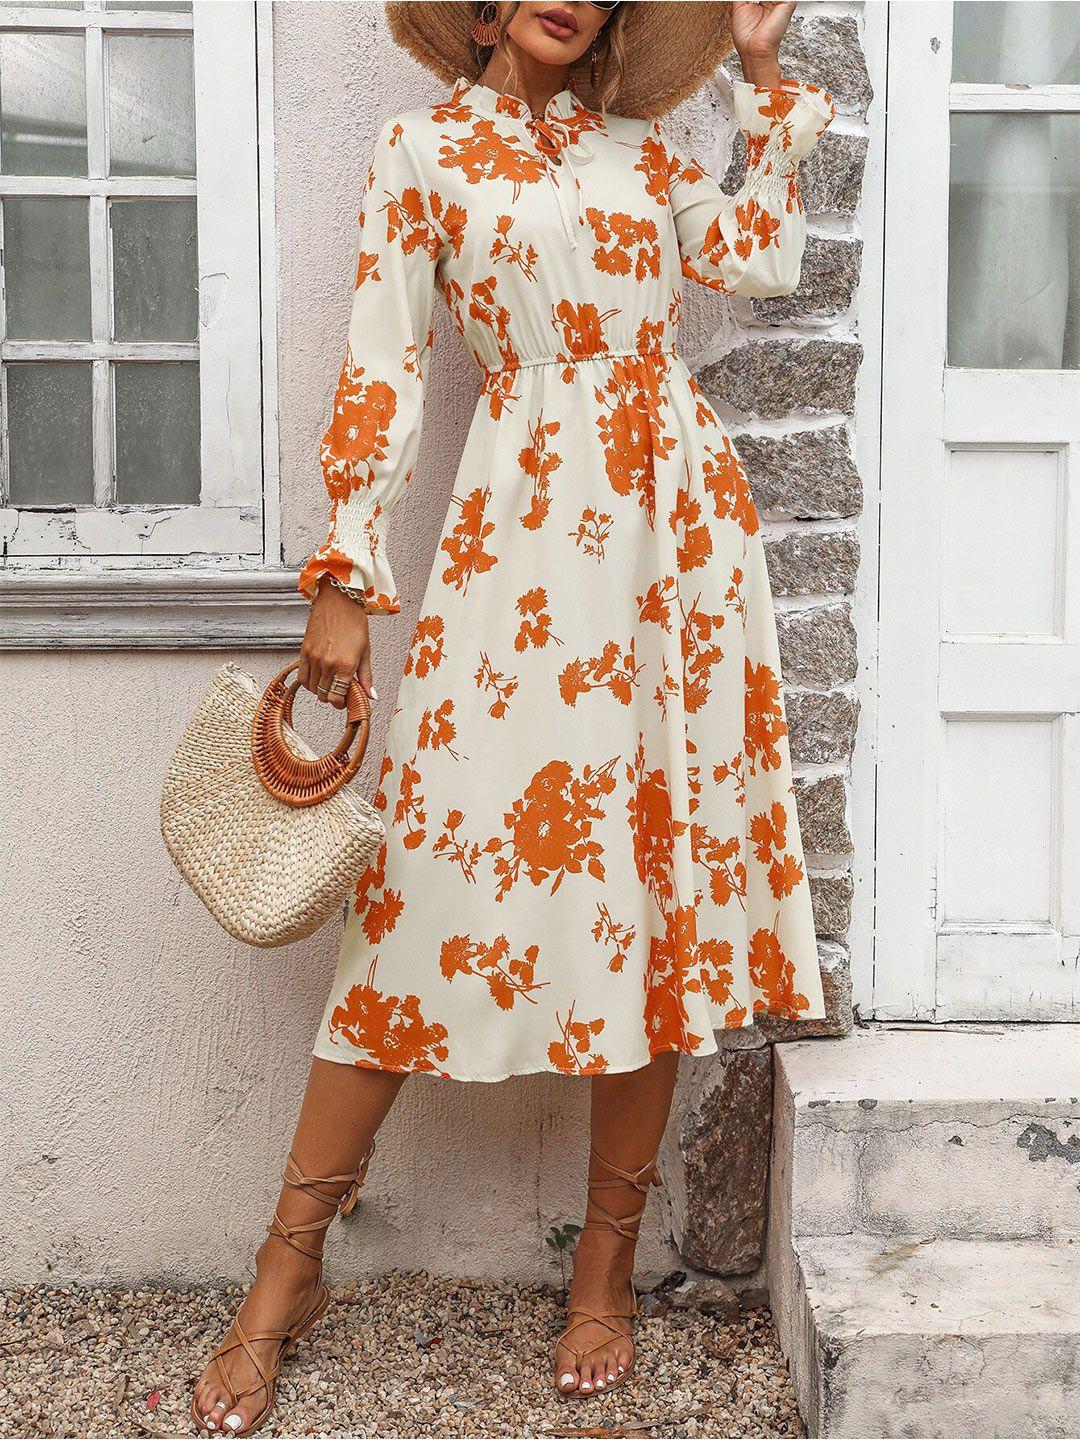 bostreet orange floral printed tie-up neck bell sleeves casual fit & flare dress